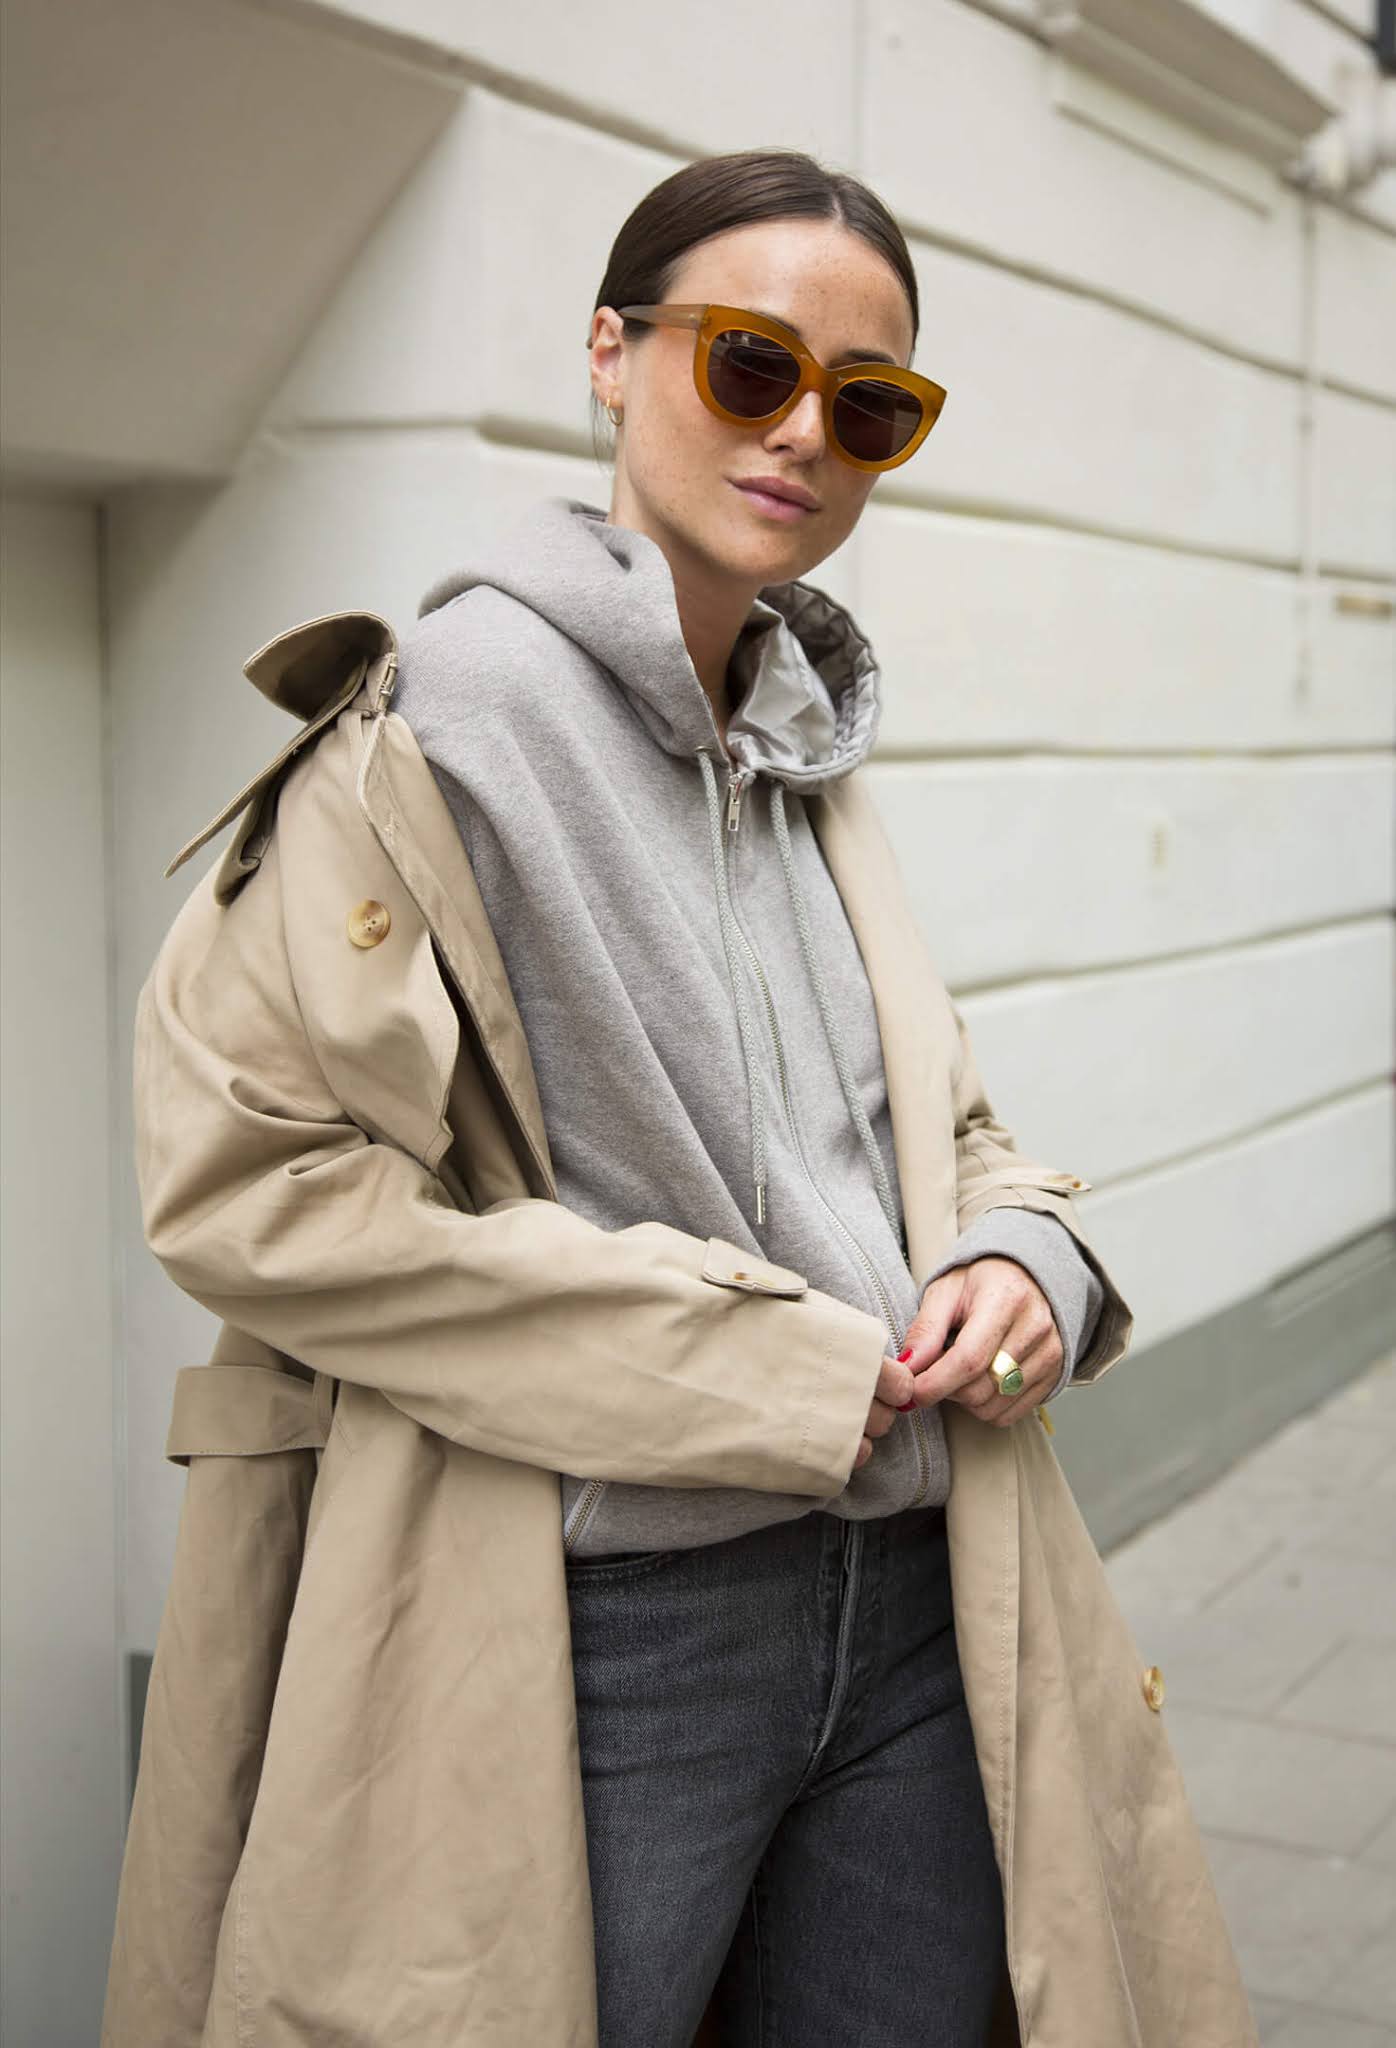 A Hoodie and Trench Coat Make for the Perfect Spring Outfit Combo